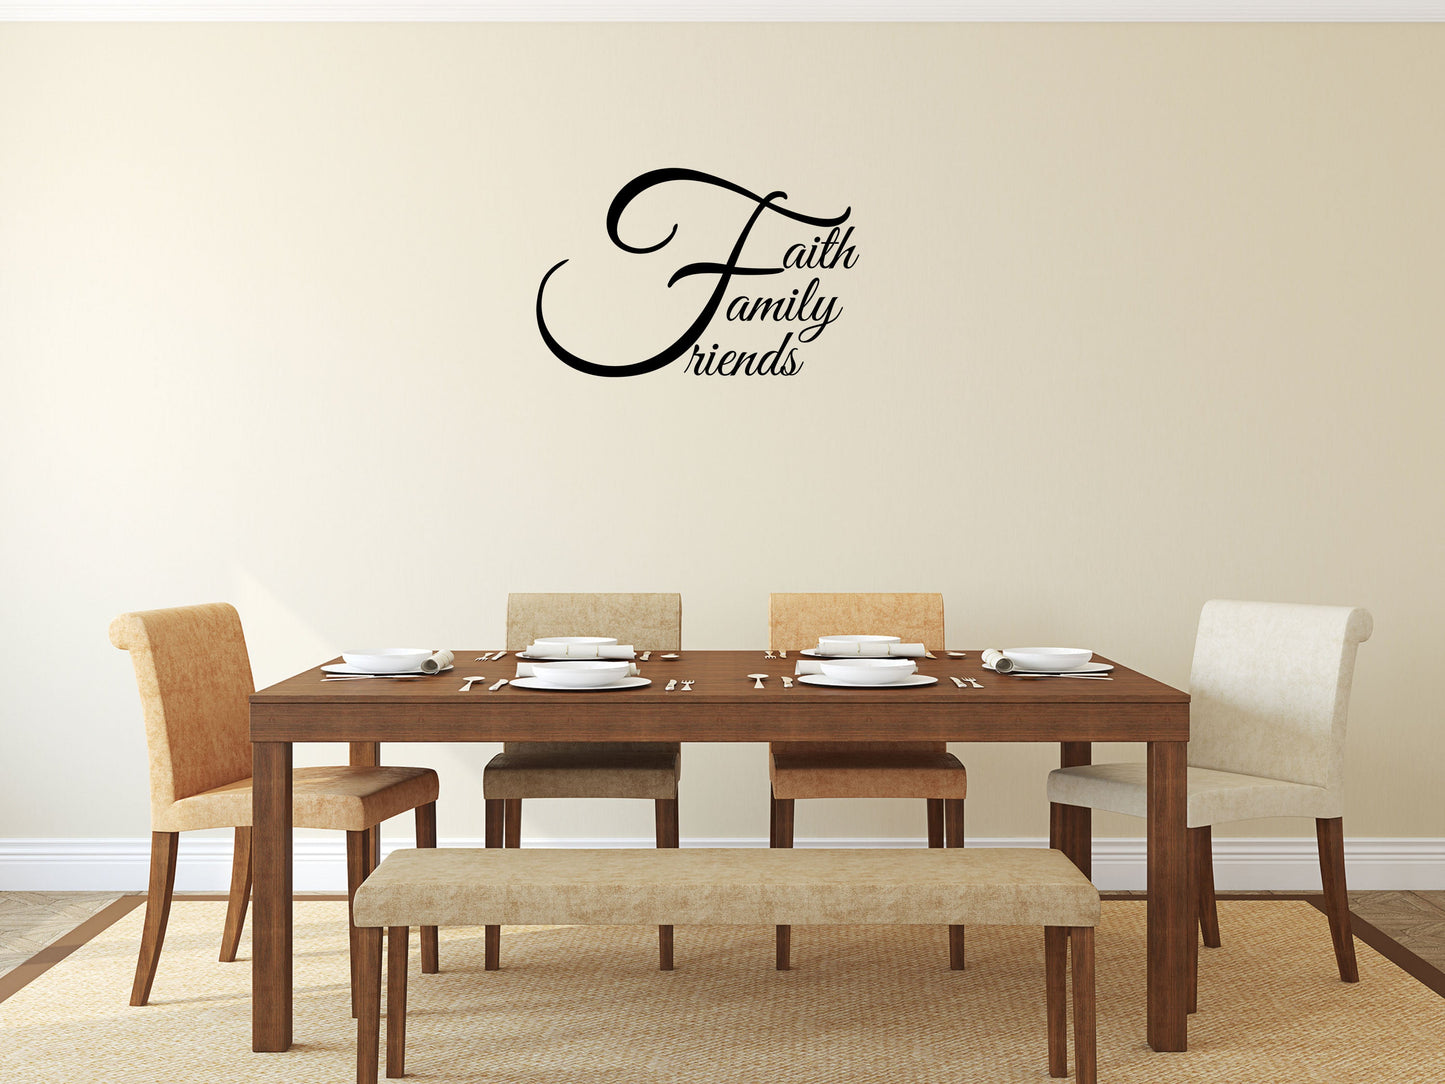 Faith Family Friends Vinyl Wall Decal Inspirational Wall Signs 